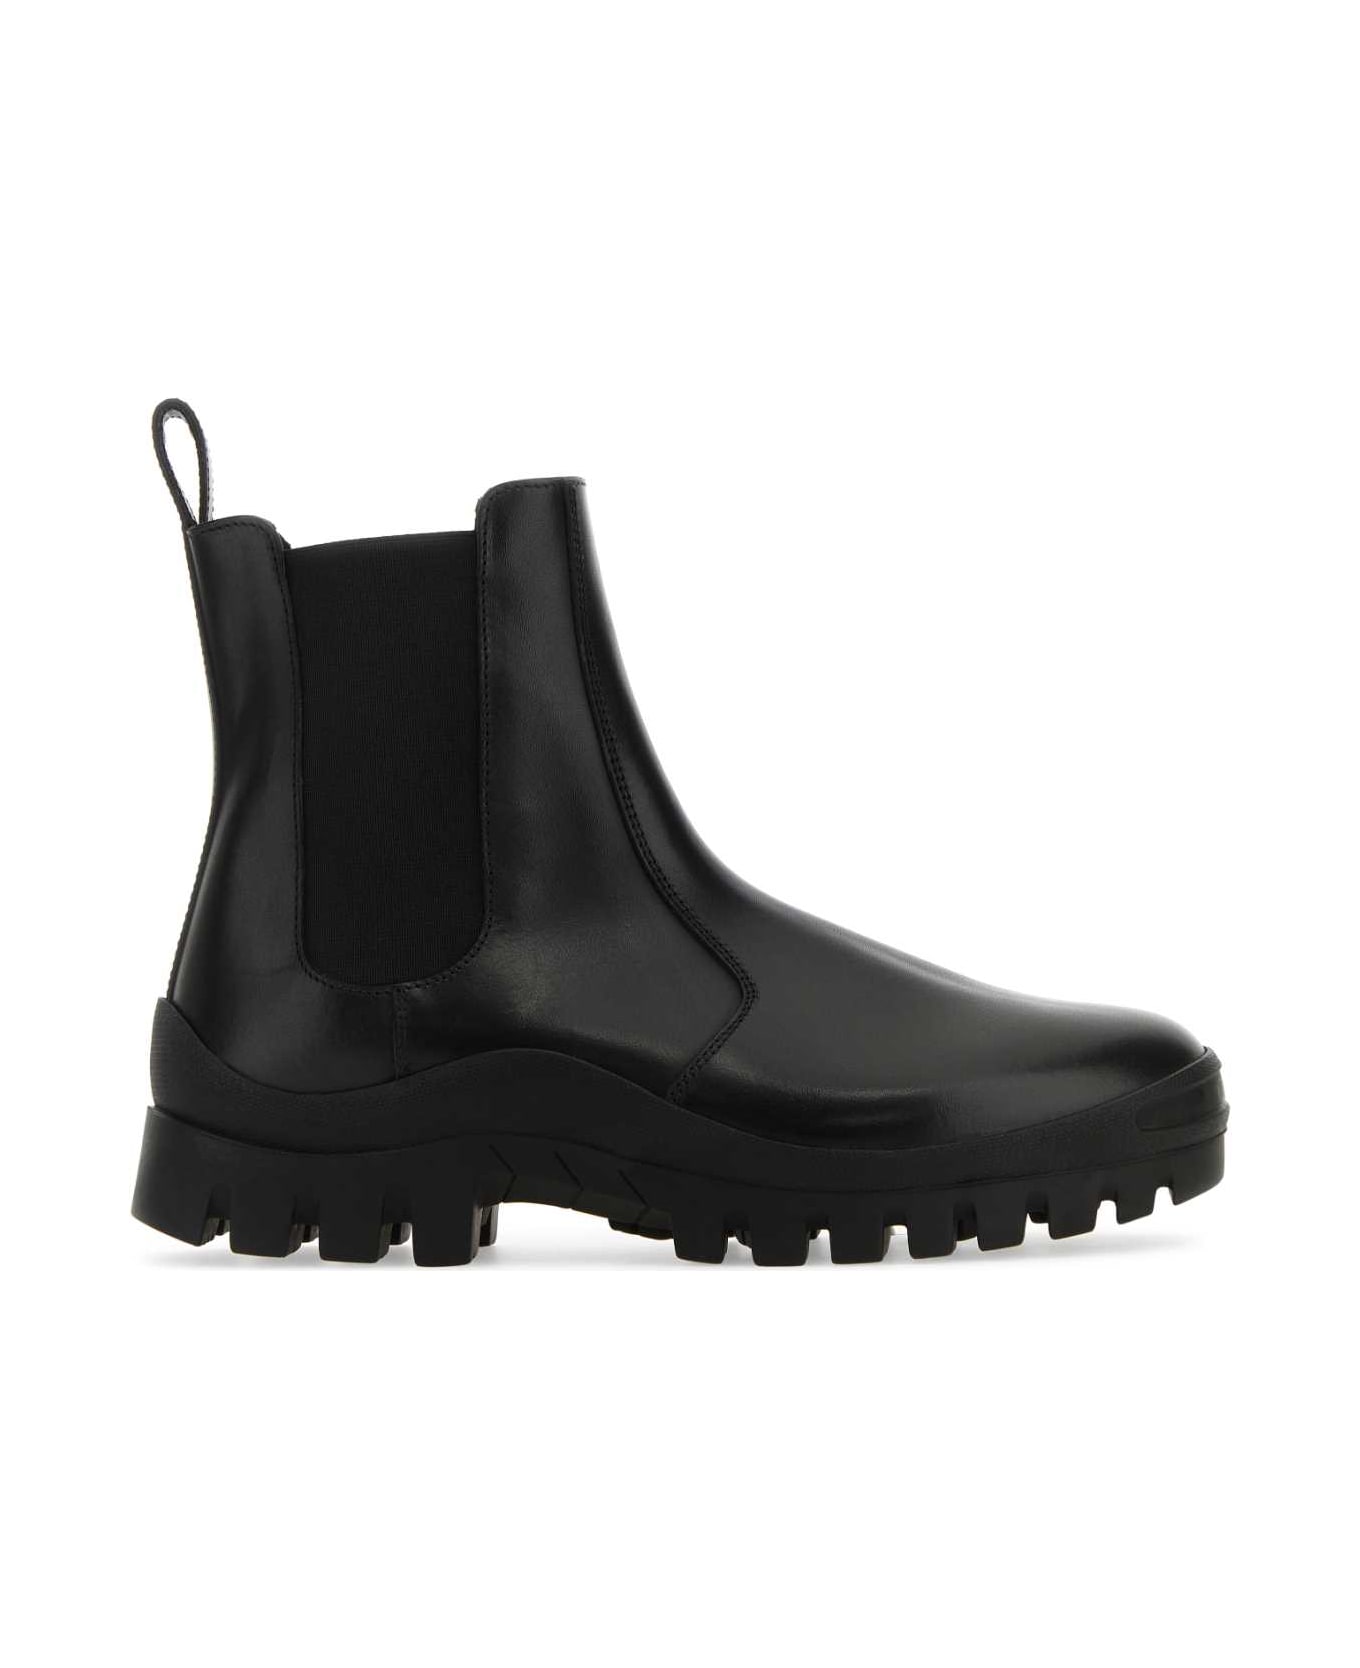 The Row Black Leather Greta Winter Ankle Boots - Black